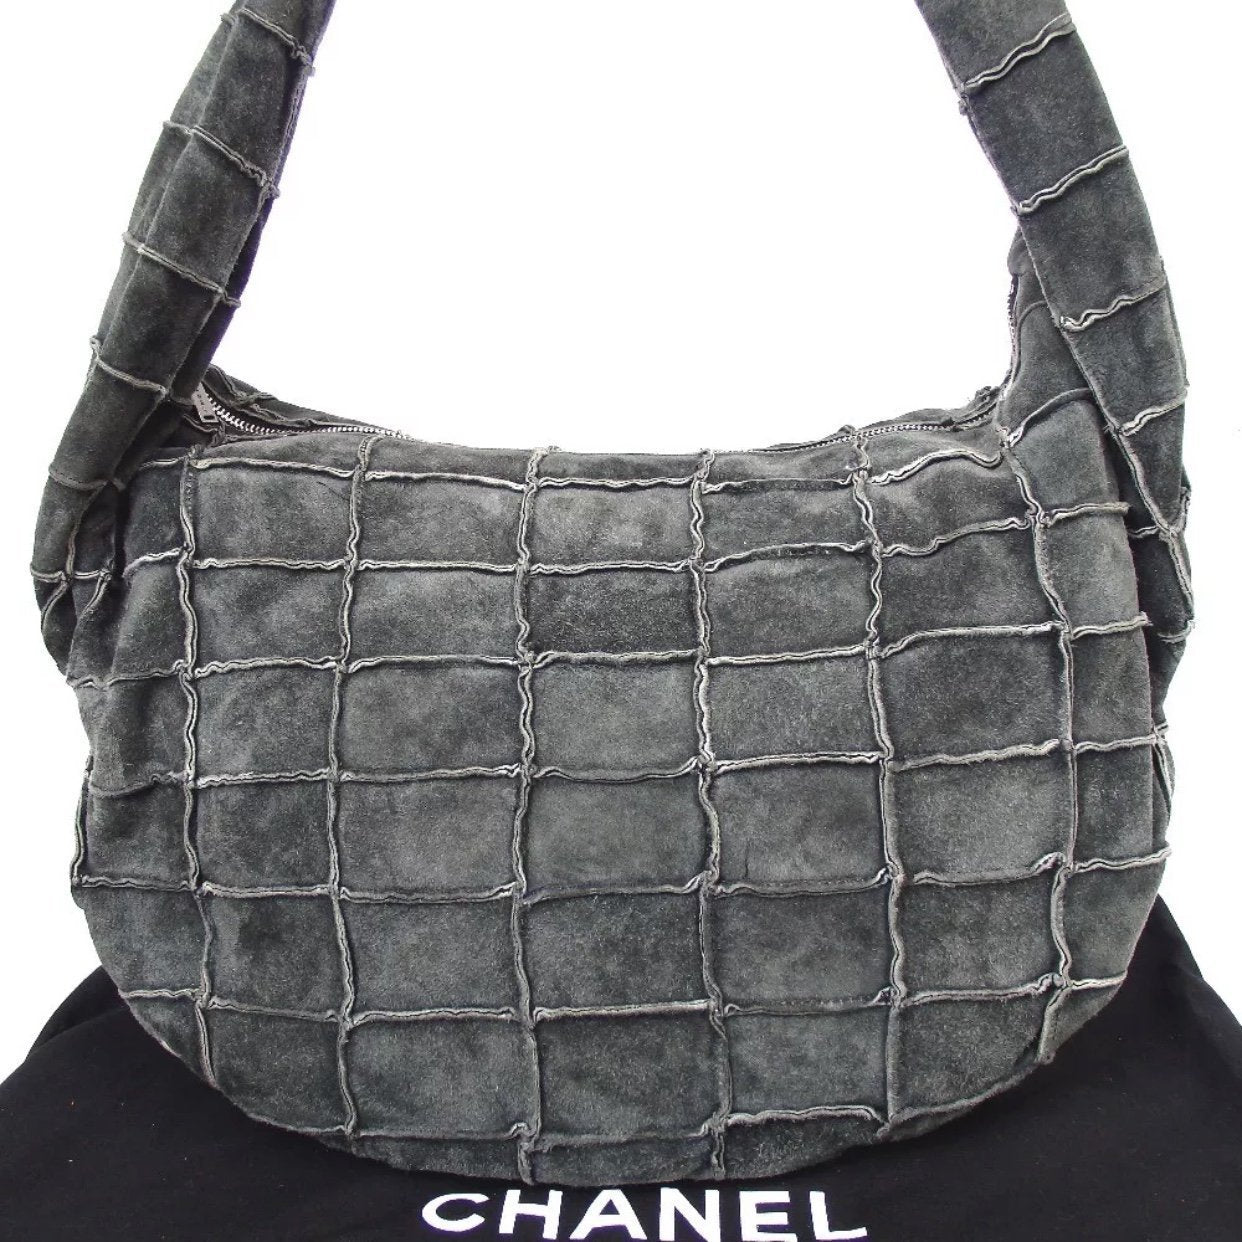 CHANEL Paris-Seoul Patchwork Quilted Suede 2016 Drawstring Bag